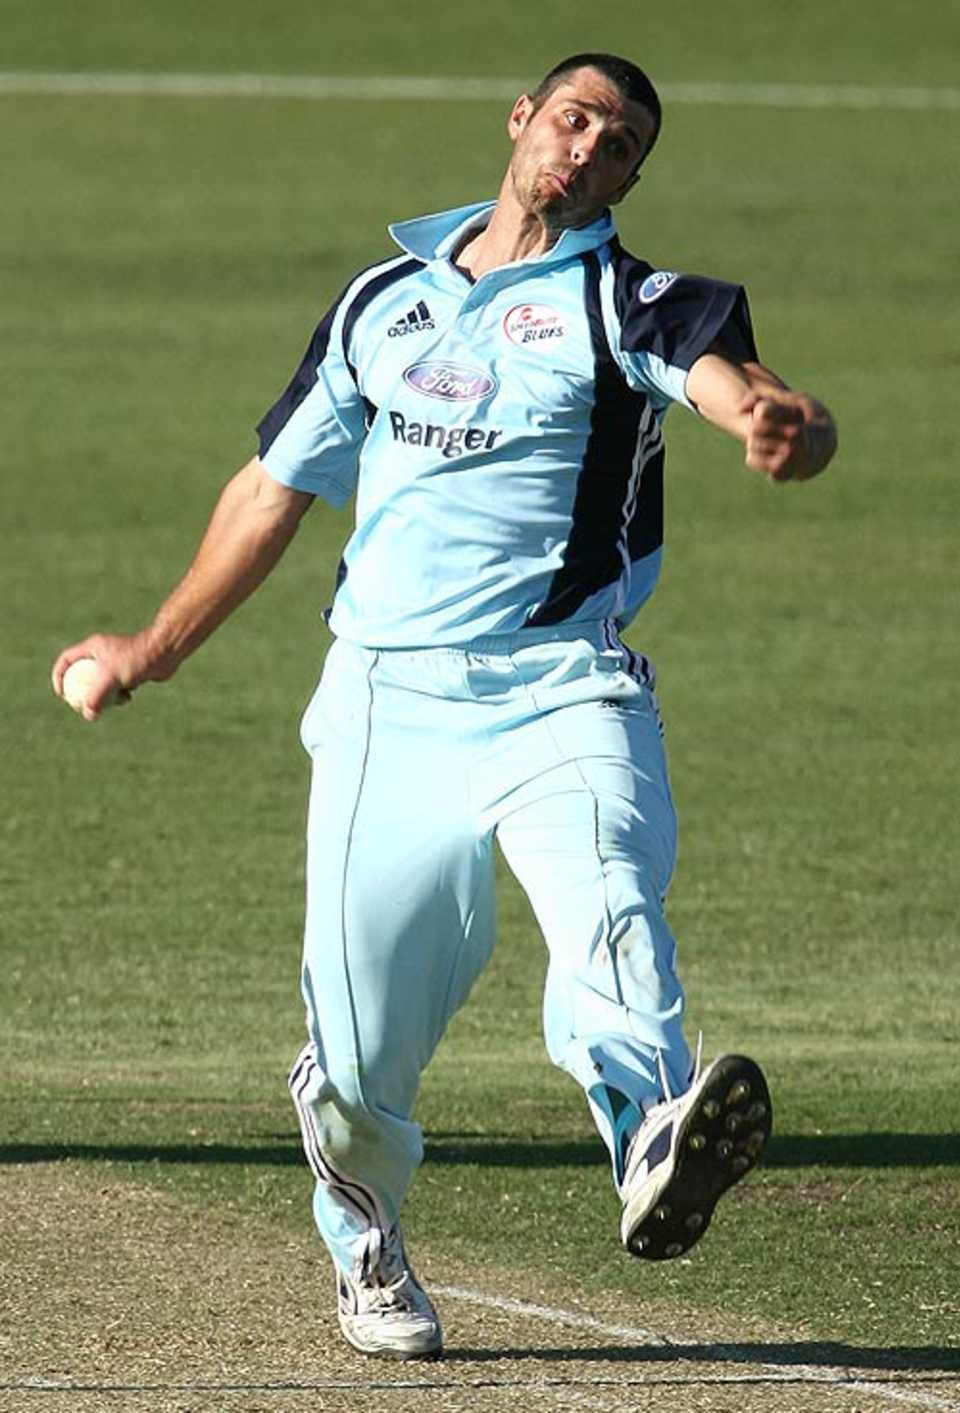 Mark Cameron claimed 2 for 55 on debut